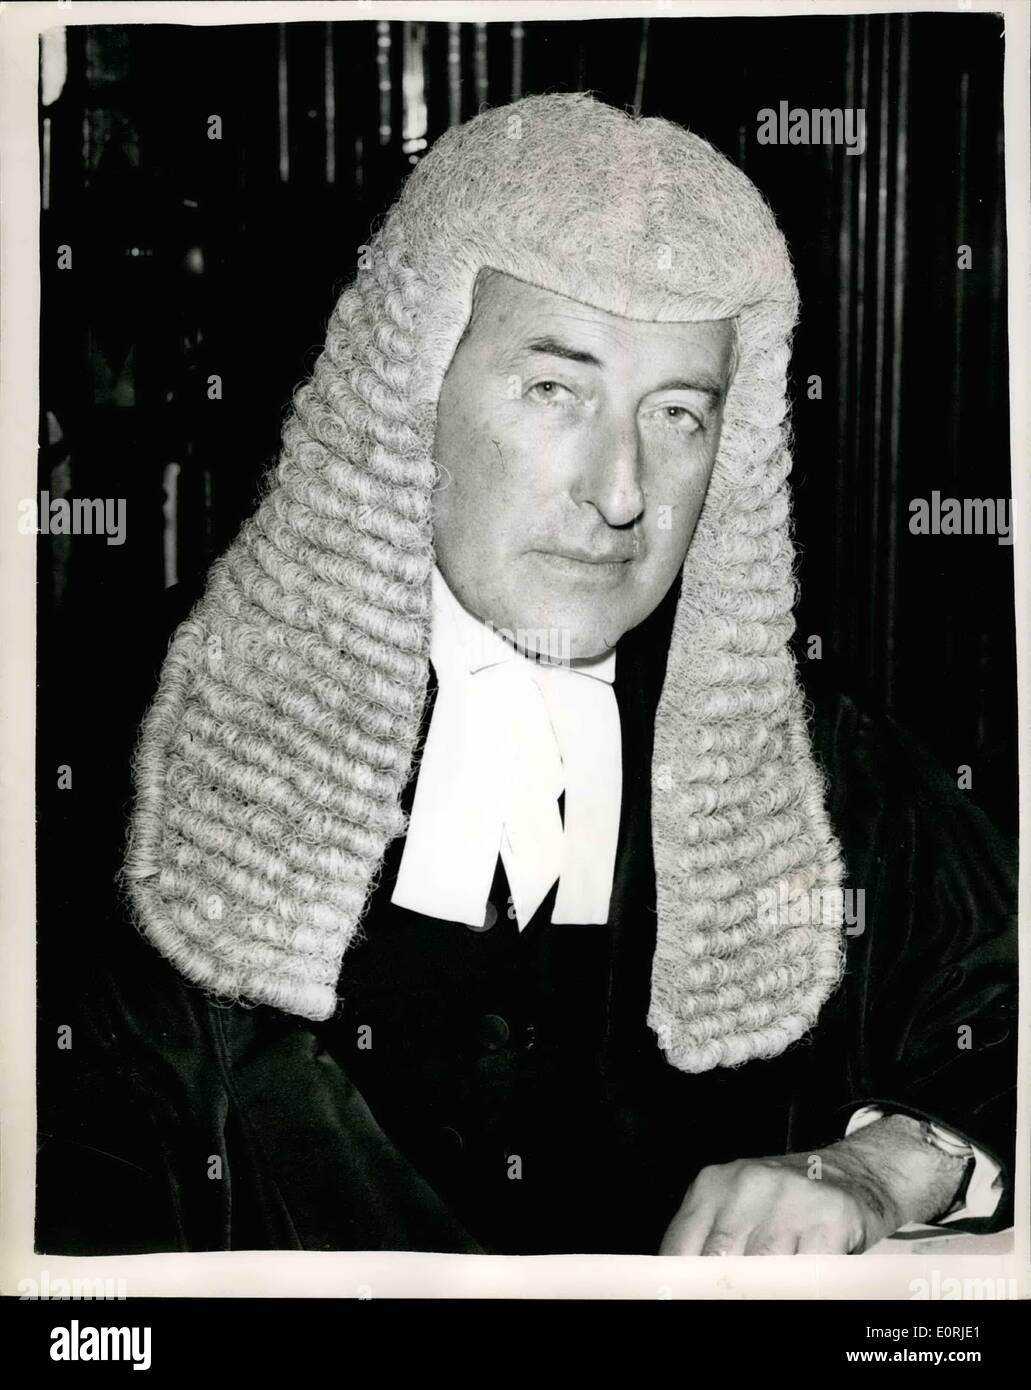 Oct. 10, 1959 - New Speaker Of The House Of Commons: Sir Harry Hylton Foster, Solicitor General since 1954 and Conservative M.P. for the Cities of London and Westminster was elected as Speaker of the House of Commons yesterday. Photo shows Sir Harry Hylton Foster  his robes in the Library of the Speak  House this afternoon. Stock Photo